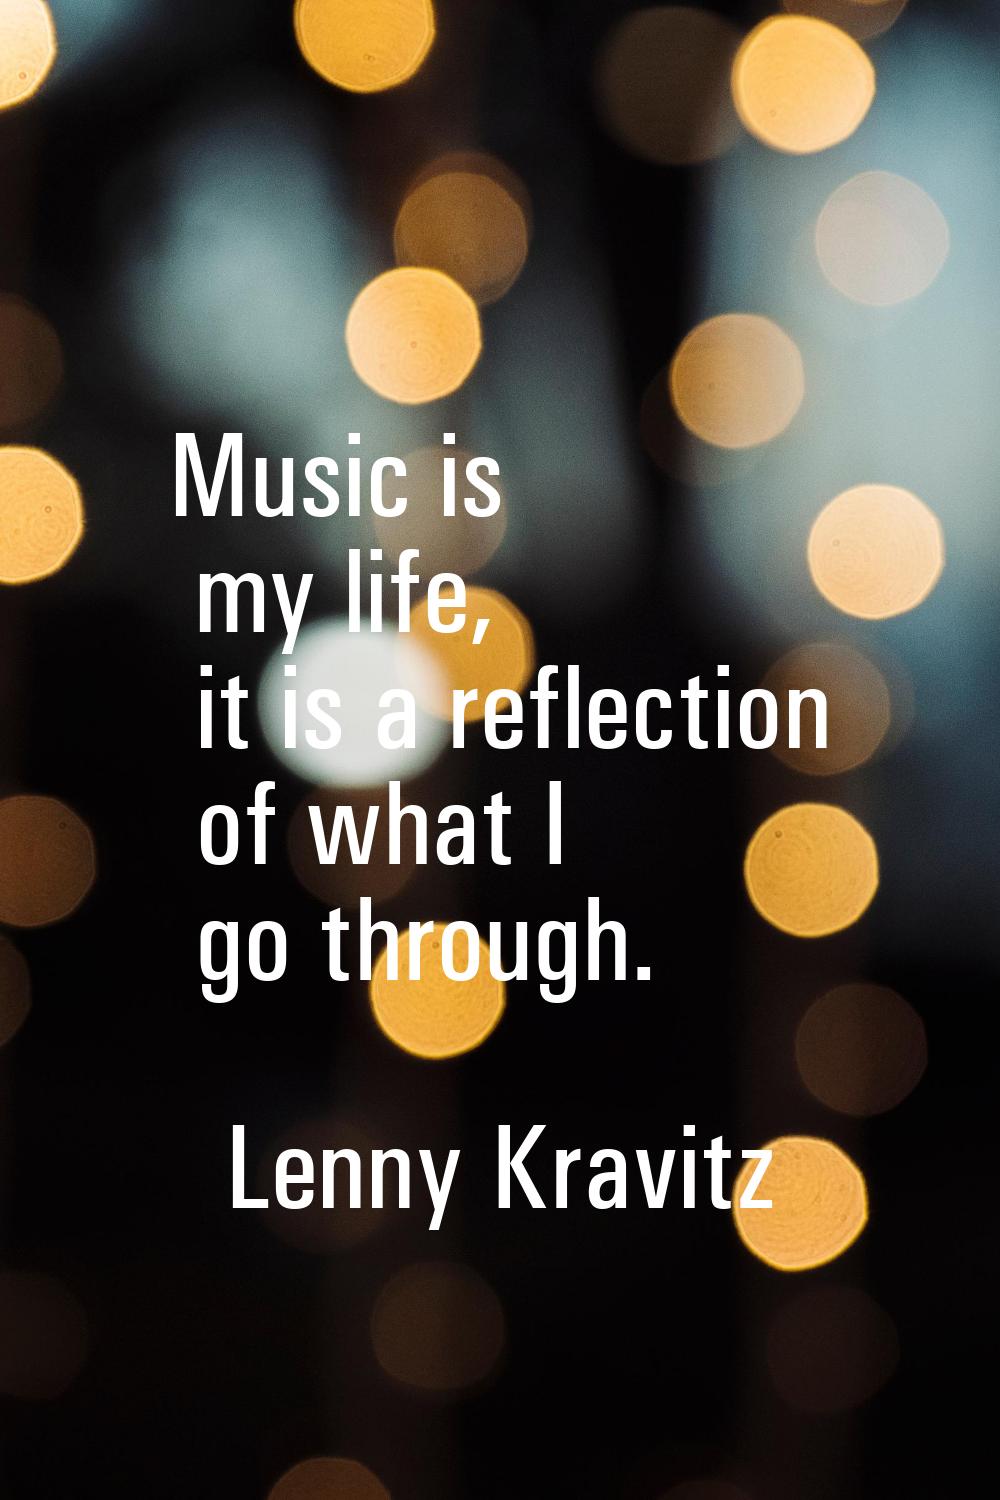 Music is my life, it is a reflection of what I go through.